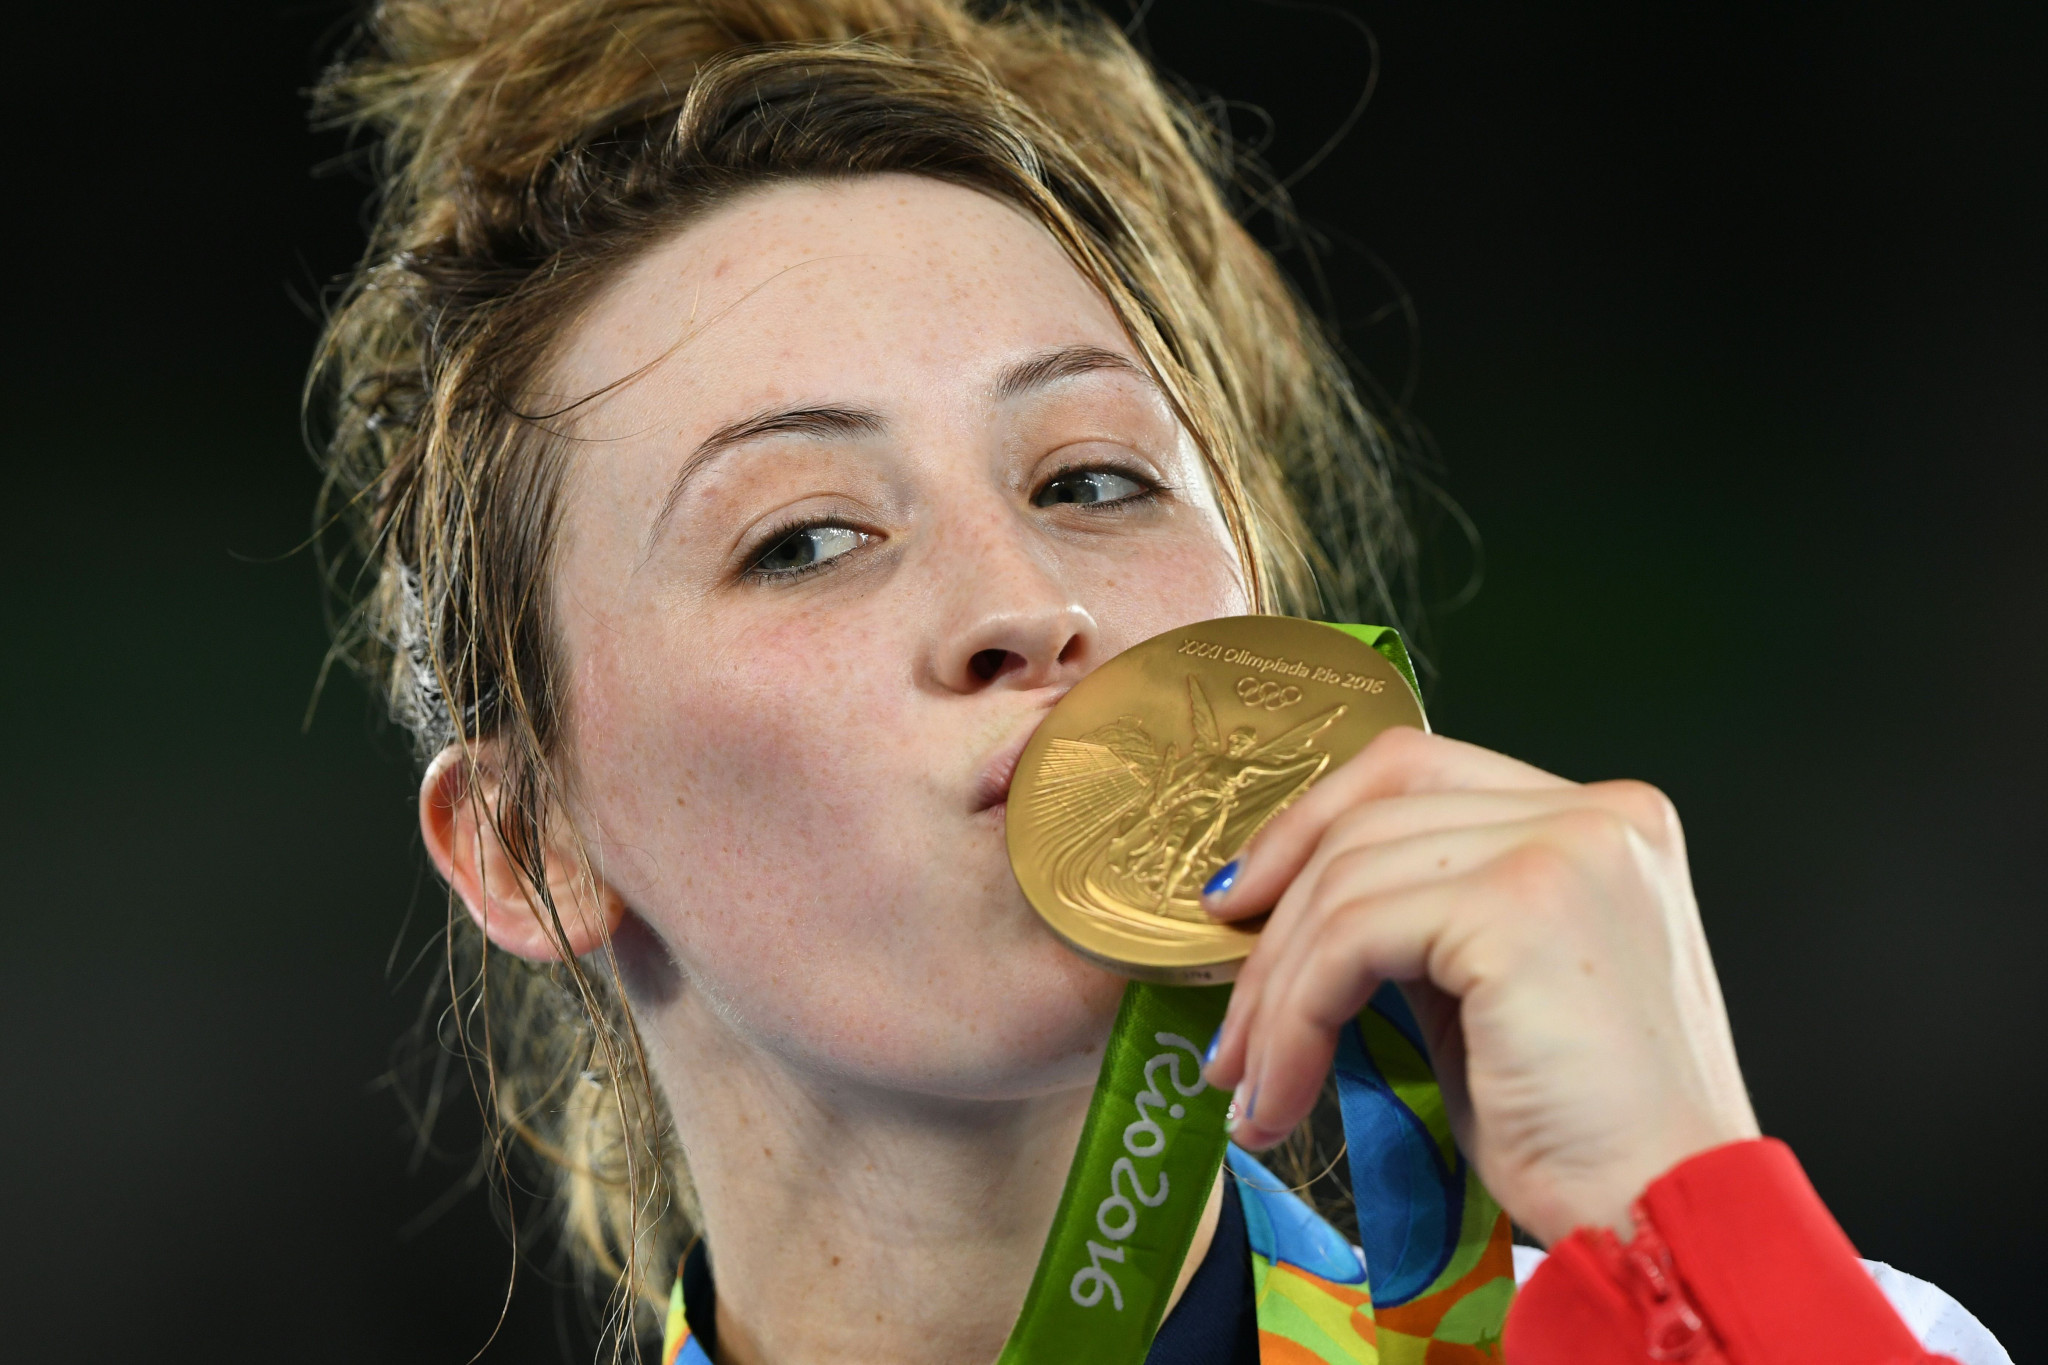 Jade Jones won gold for Great Britain in taekwondo's -57kg category at Rio 2016 ©Getty Images